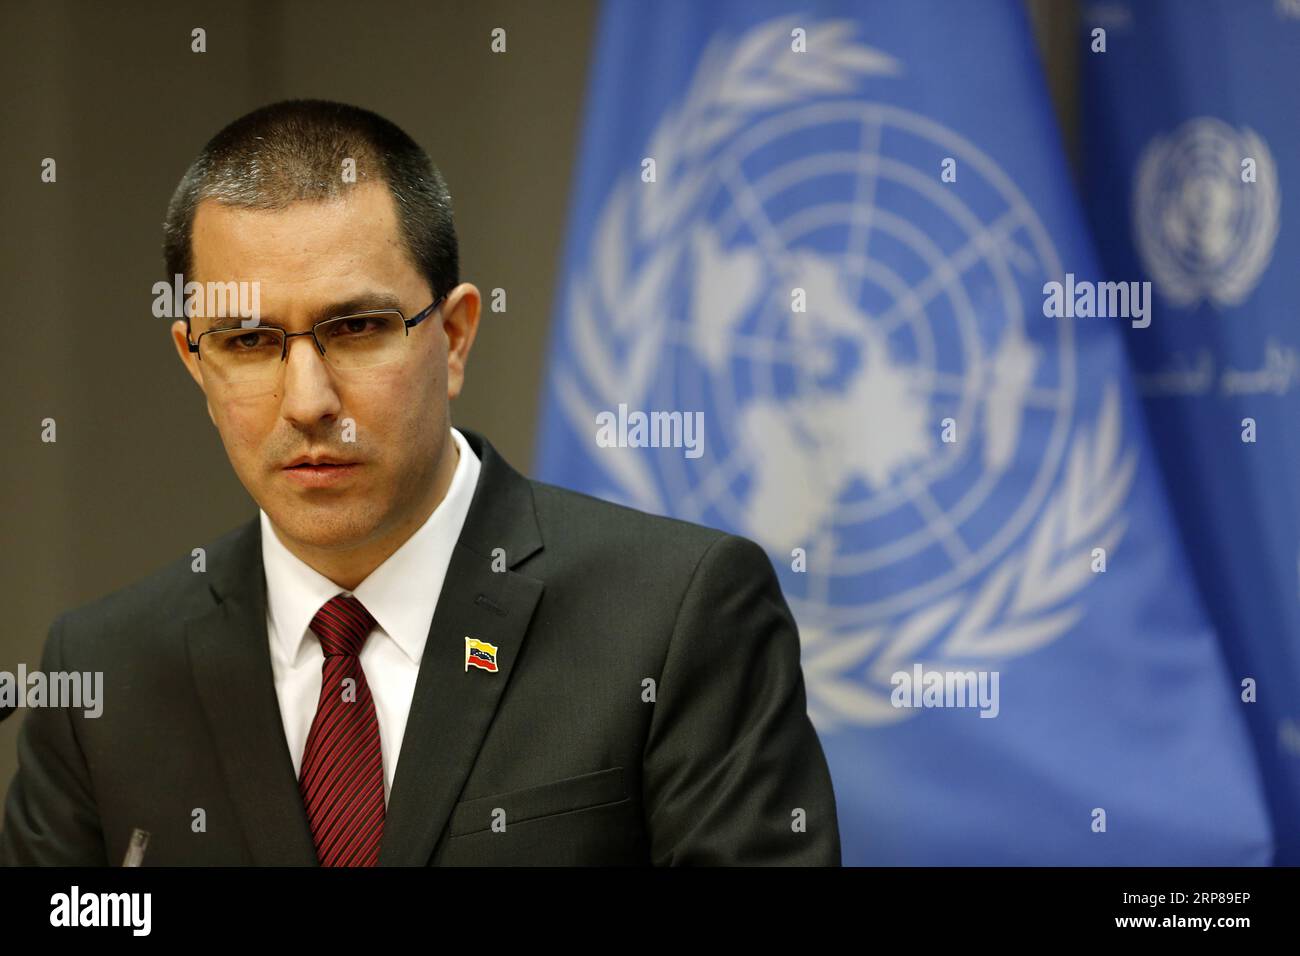 News Bilder des Tages (190223) -- UNITED NATIONS, Feb. 23, 2019 (Xinhua) -- Venezuelan Foreign Minister Jorge Arreaza attends a press conference at the United Nations headquarters in New York, Feb. 22, 2019. Venezuelan Foreign Minister Jorge Arreaza said Friday that his government wants to have peace with the United States and hopes to sit down at the table with the opposition. (Xinhua/Li Muzi) UN-VENEZUELA-FM-JORGE ARREAZA-RESS CONFERENCE PUBLICATIONxNOTxINxCHN Stock Photo